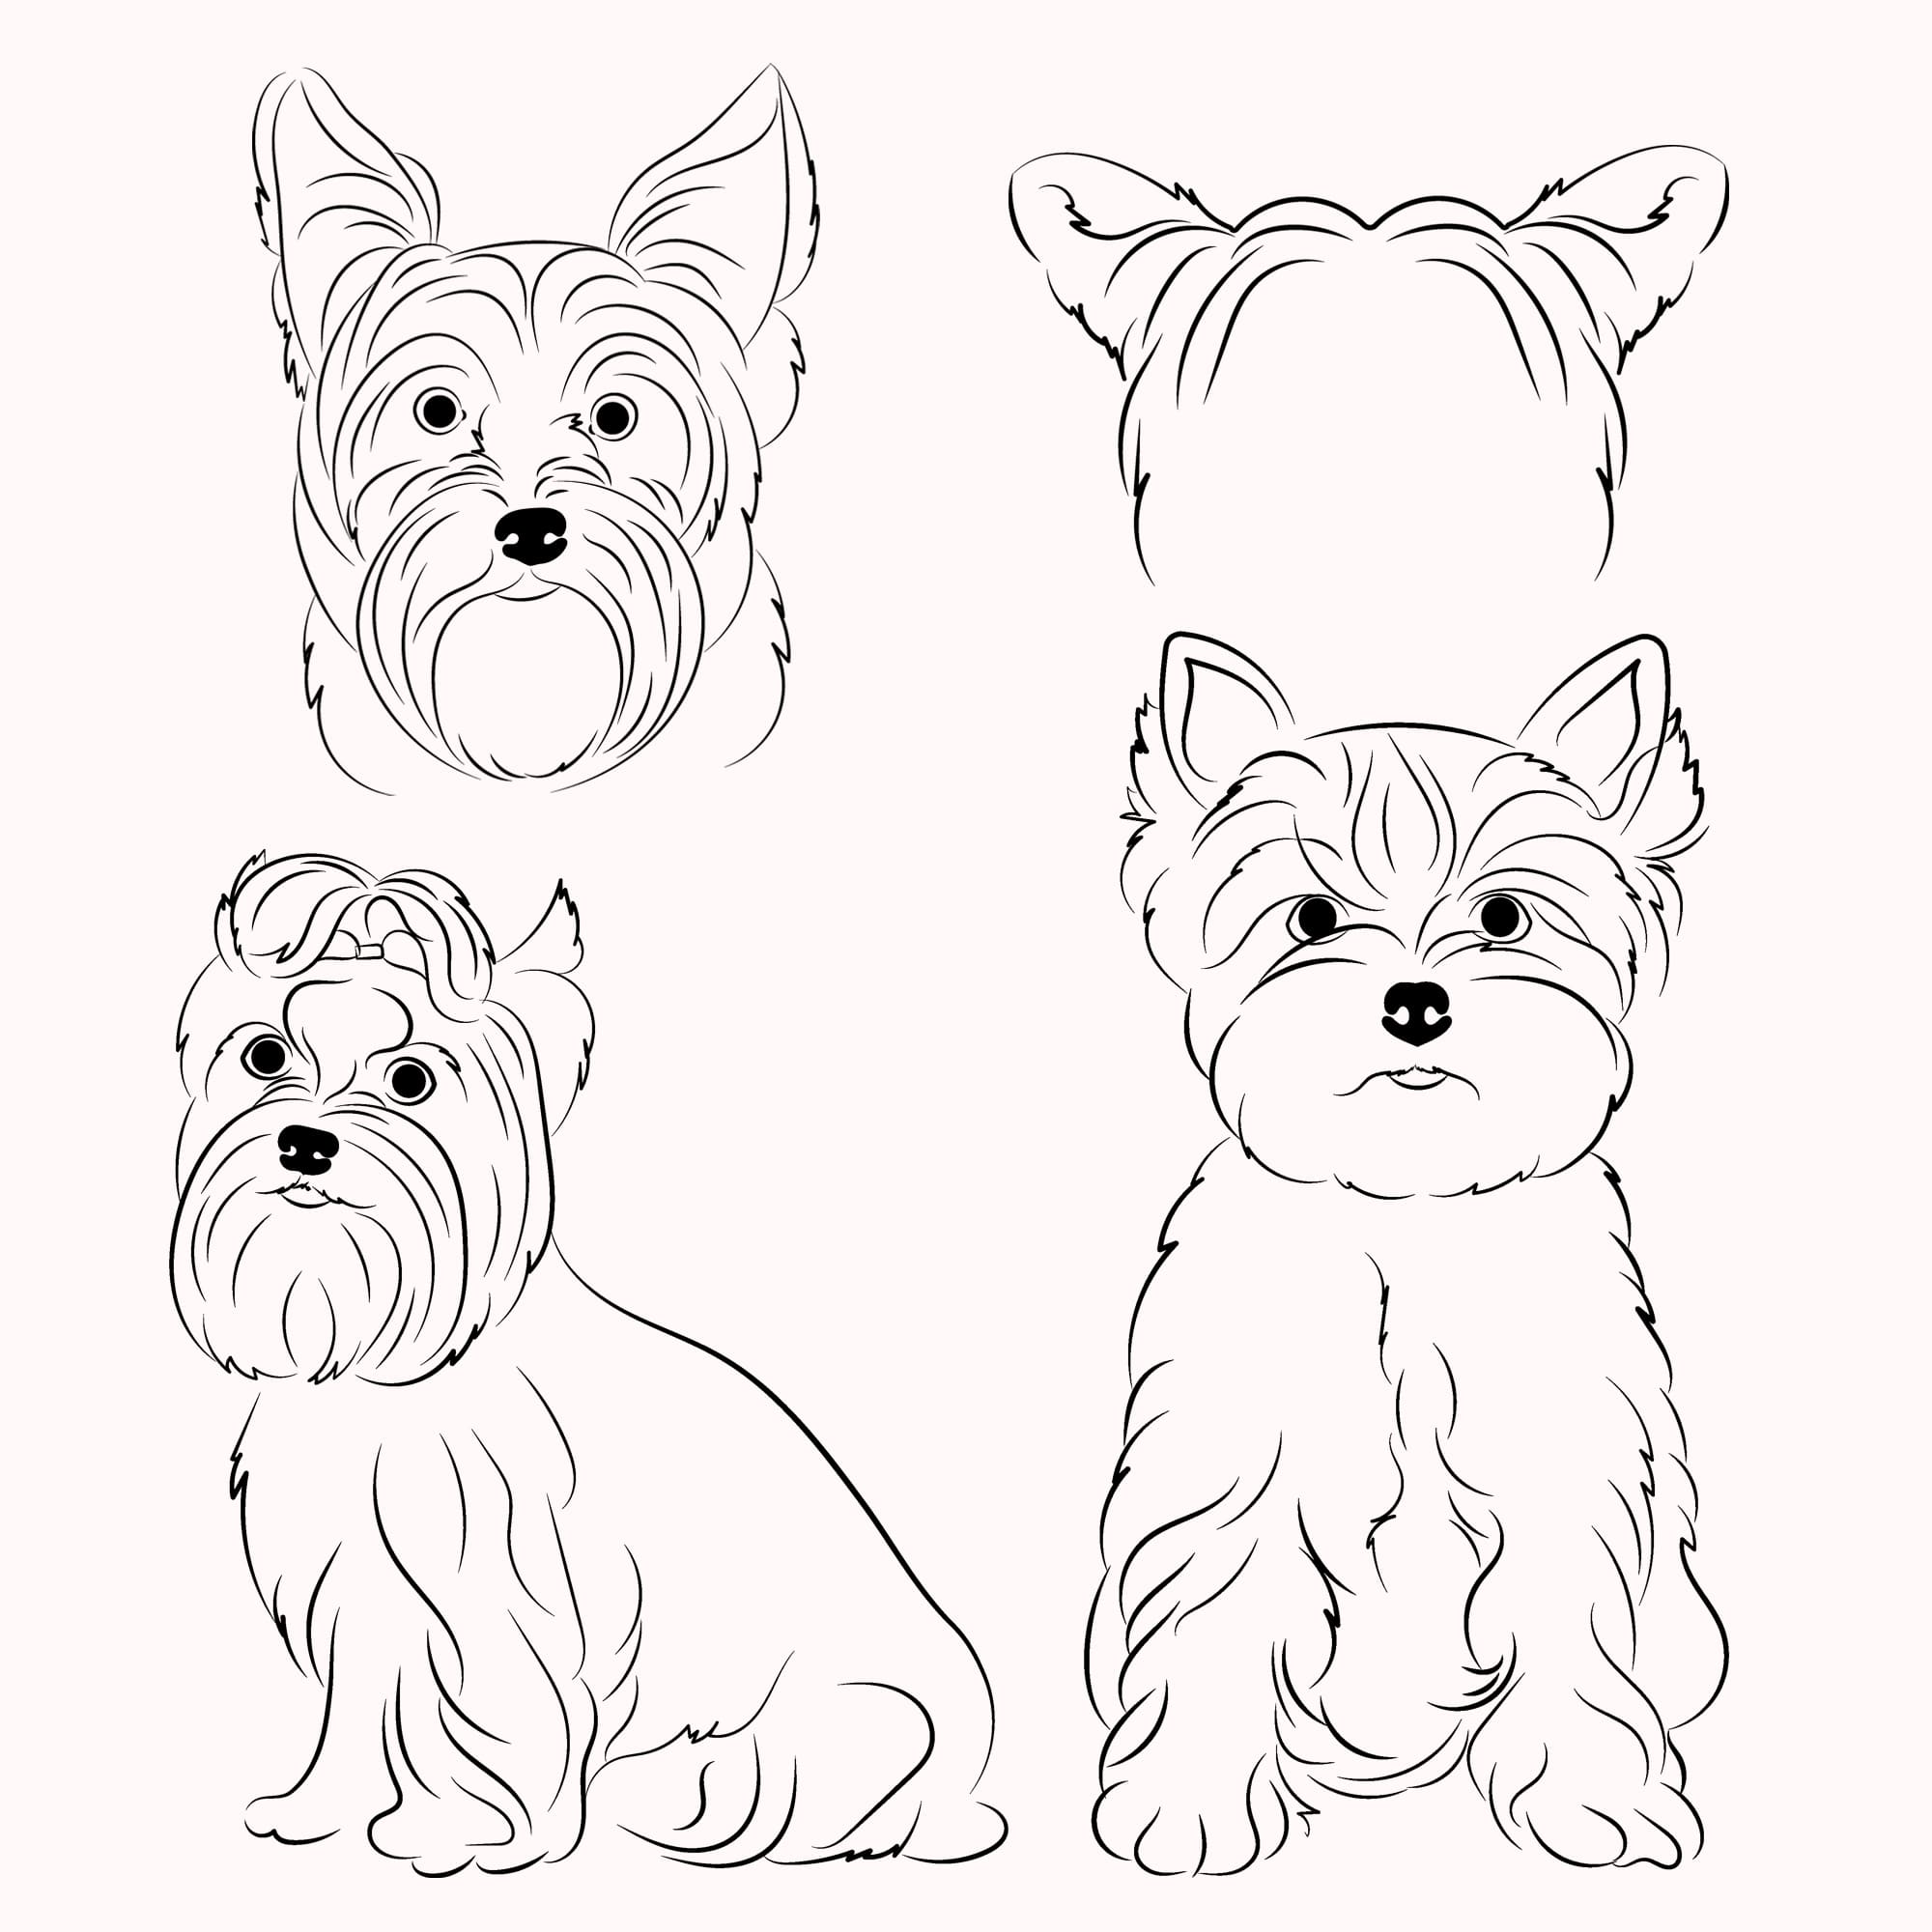 Set of three dogs with different faces.